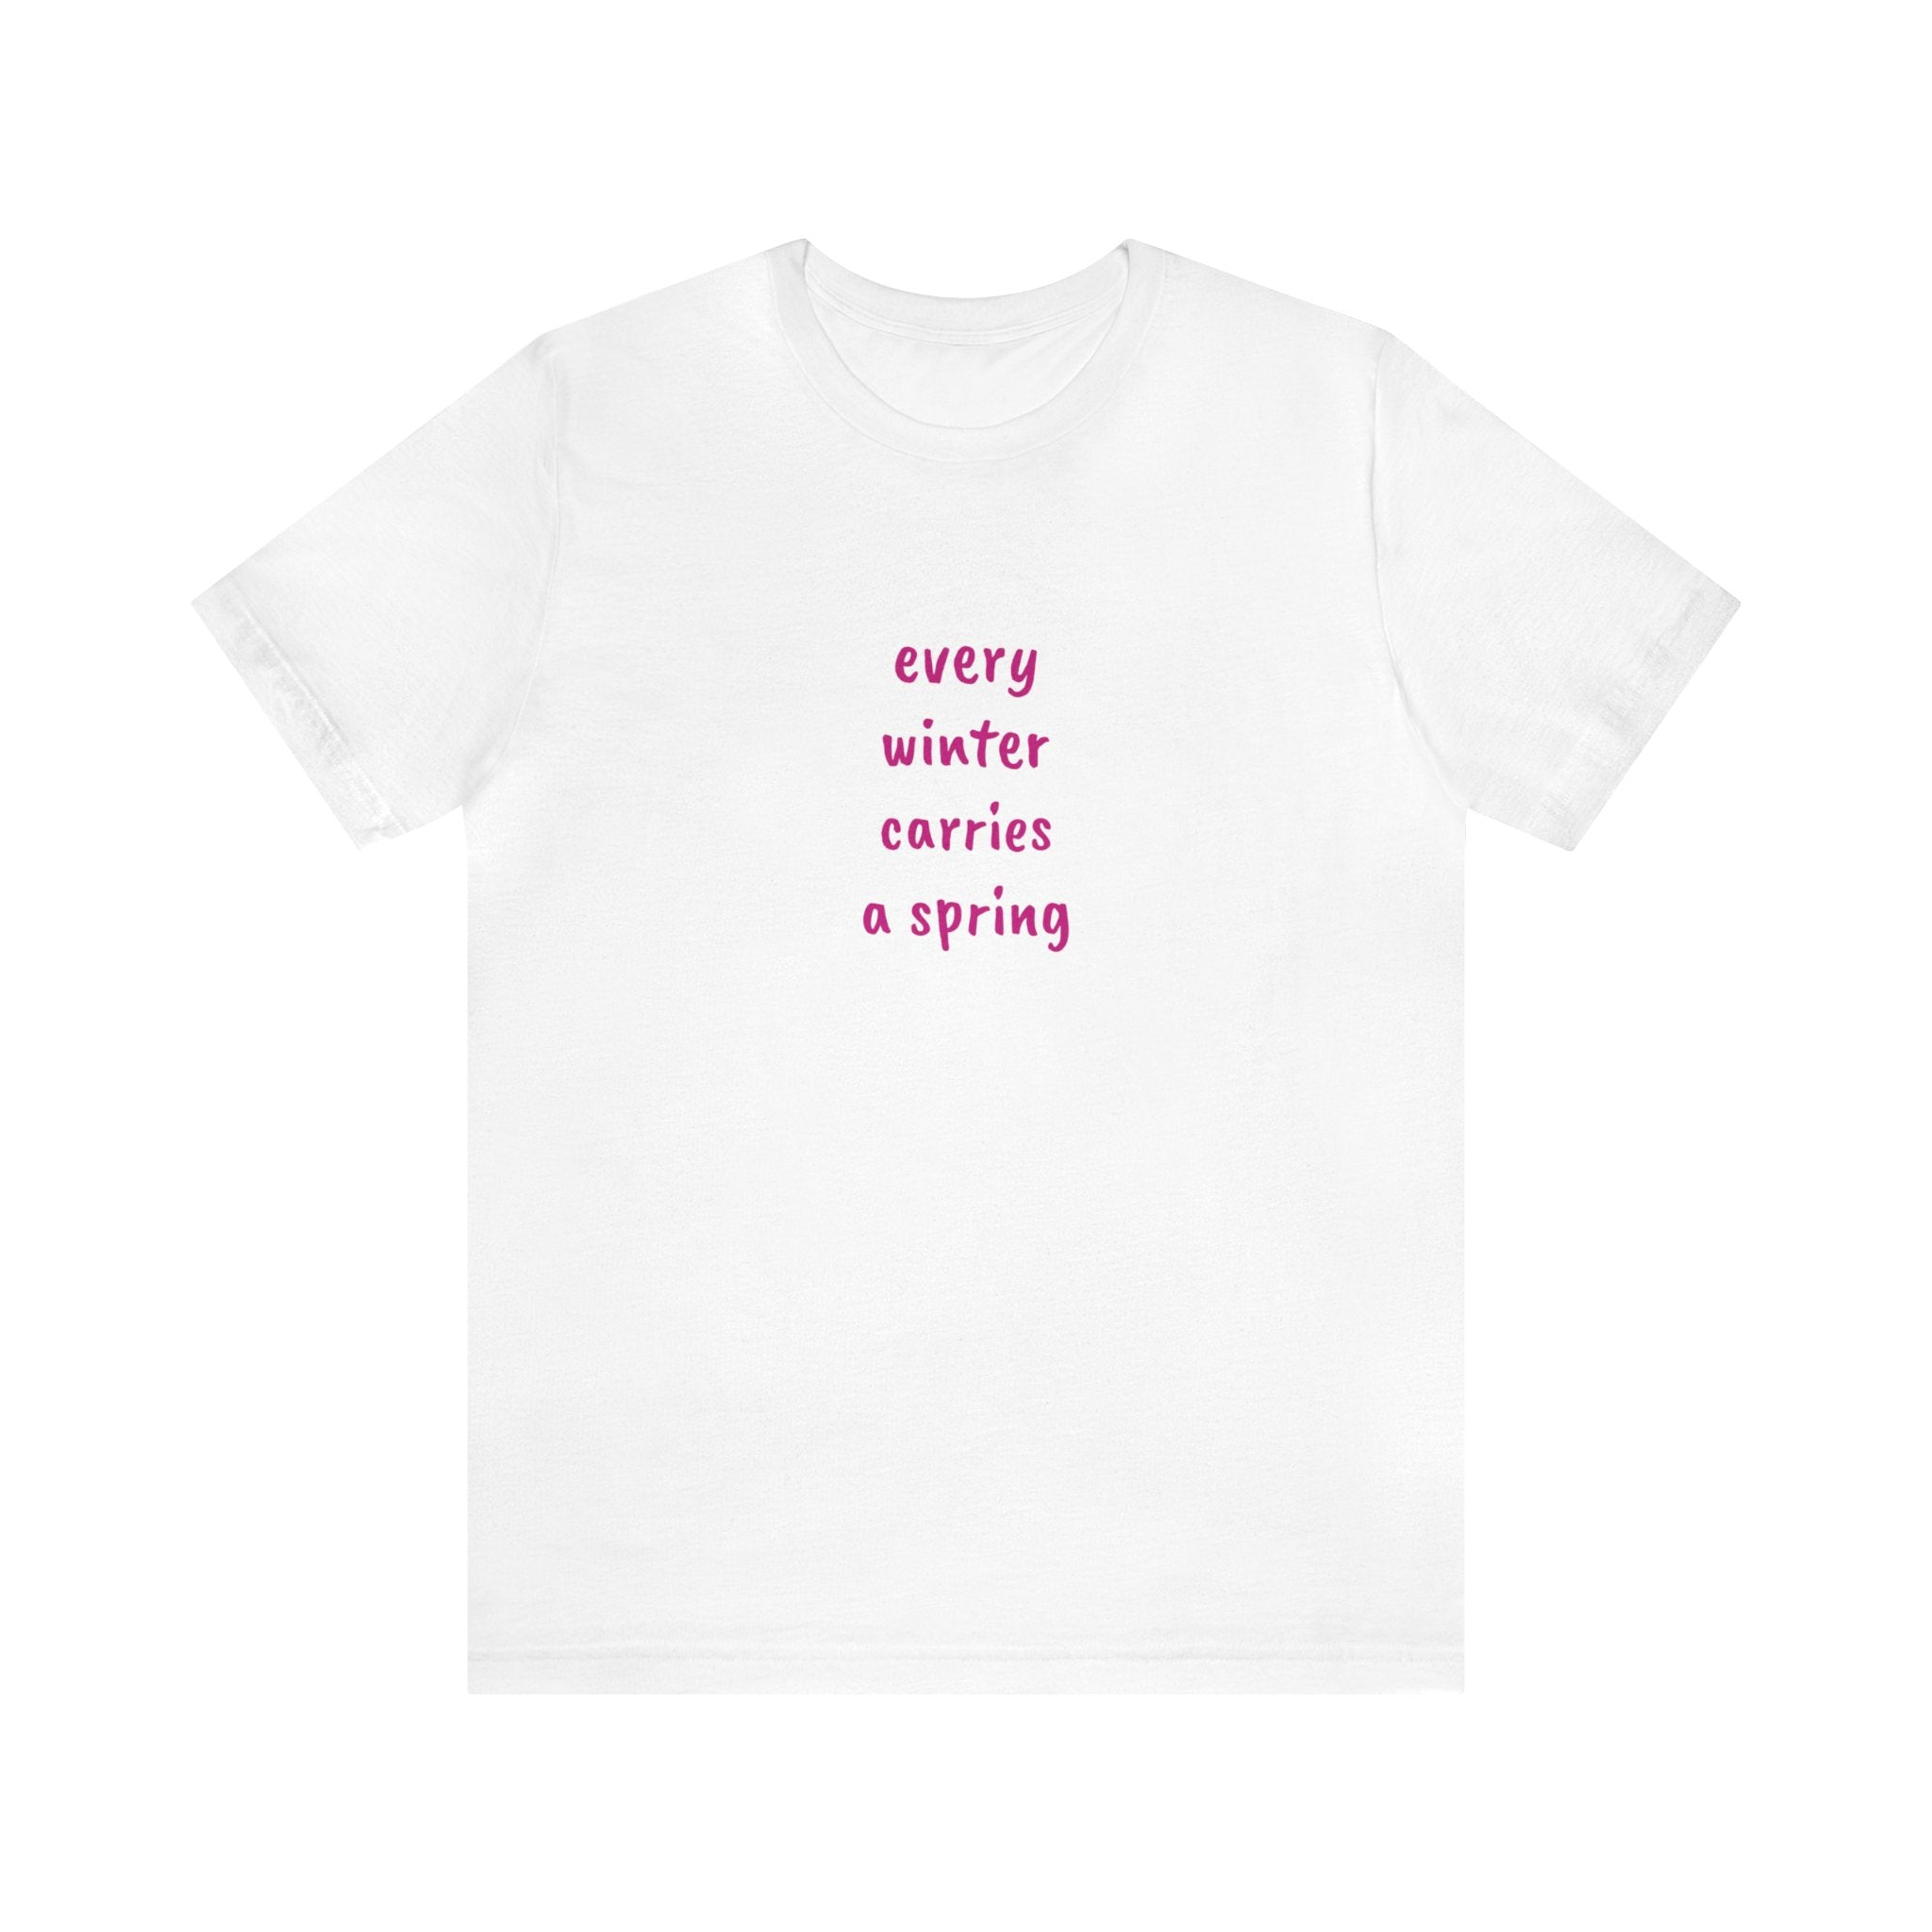 #1020 EVERY WINTER CARRIES A SPRING